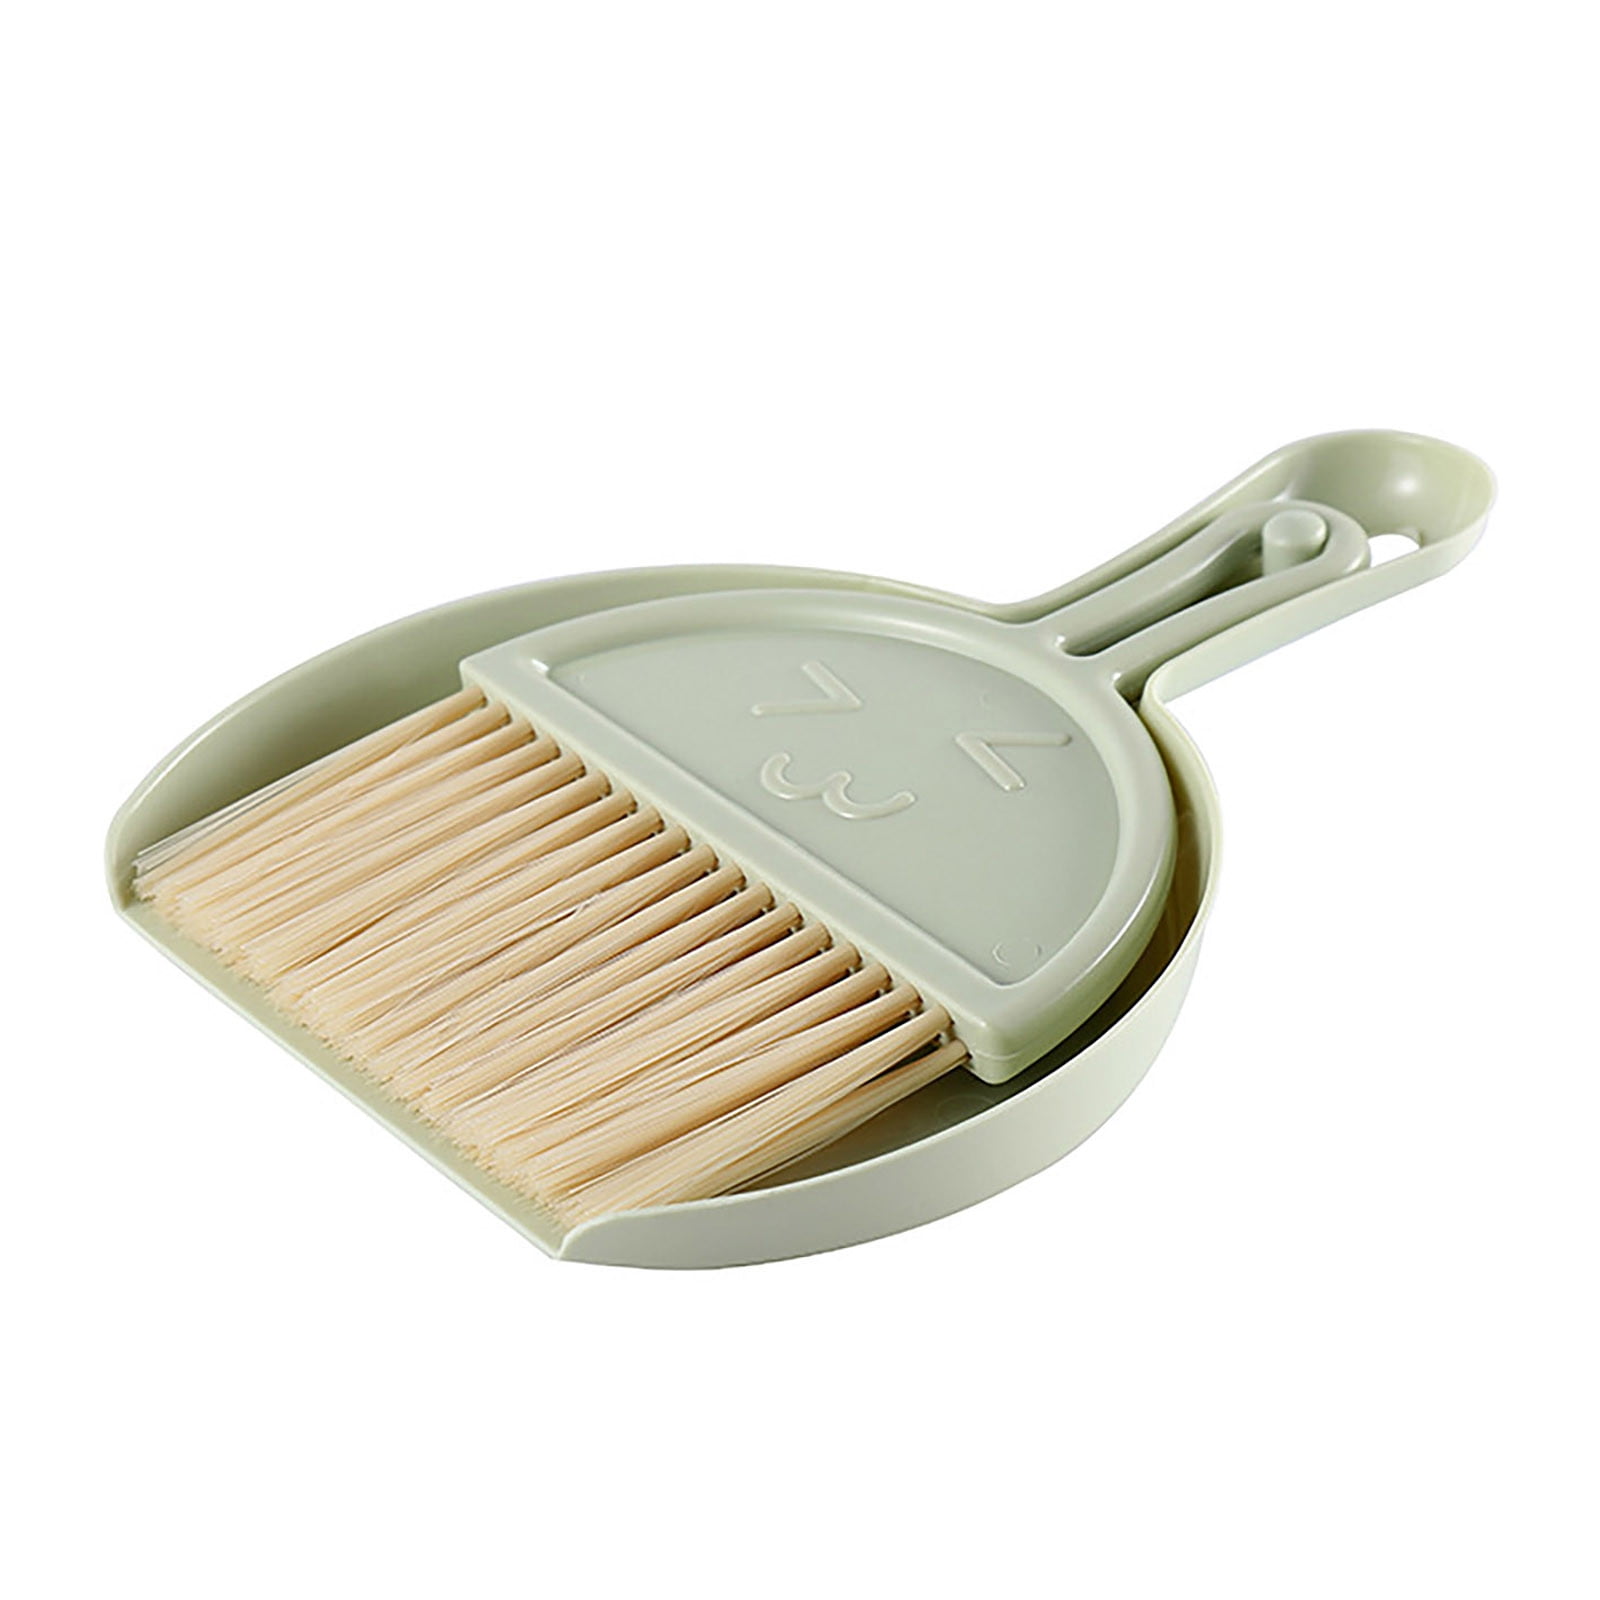 Umitay Small-Broom And Dustpan Set For Home Mini-Dust Pans With Brush Set  Hand Dustpan And Brush Set Kids-Dust Pan And-Broom/Dustpan Combo Set  Hangable Whisk-Broom 